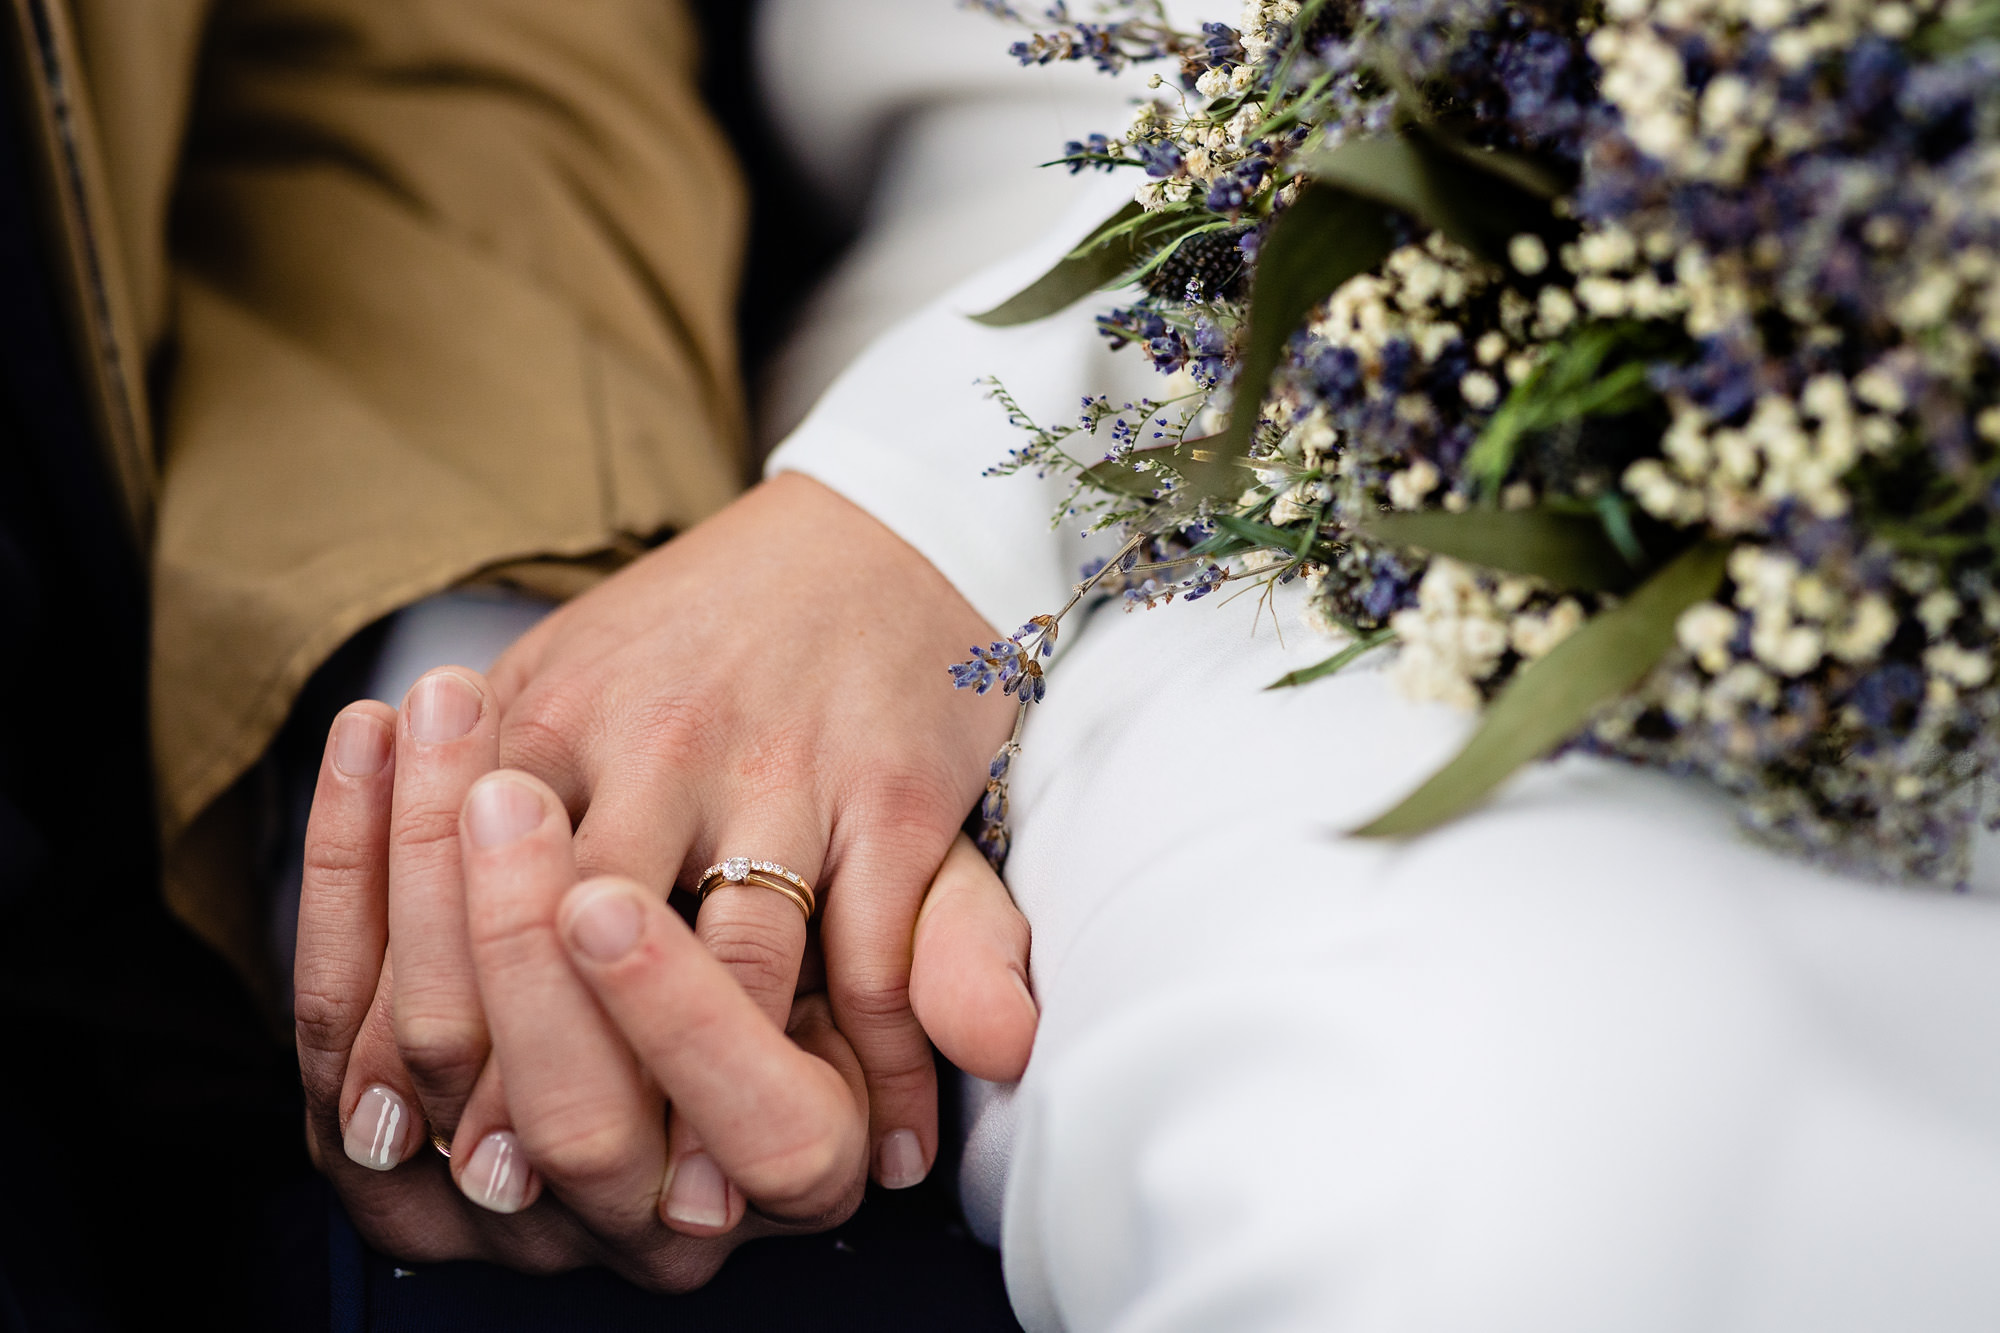 An intimate hand hold at a wedding in Boothbay Harbor, Maine